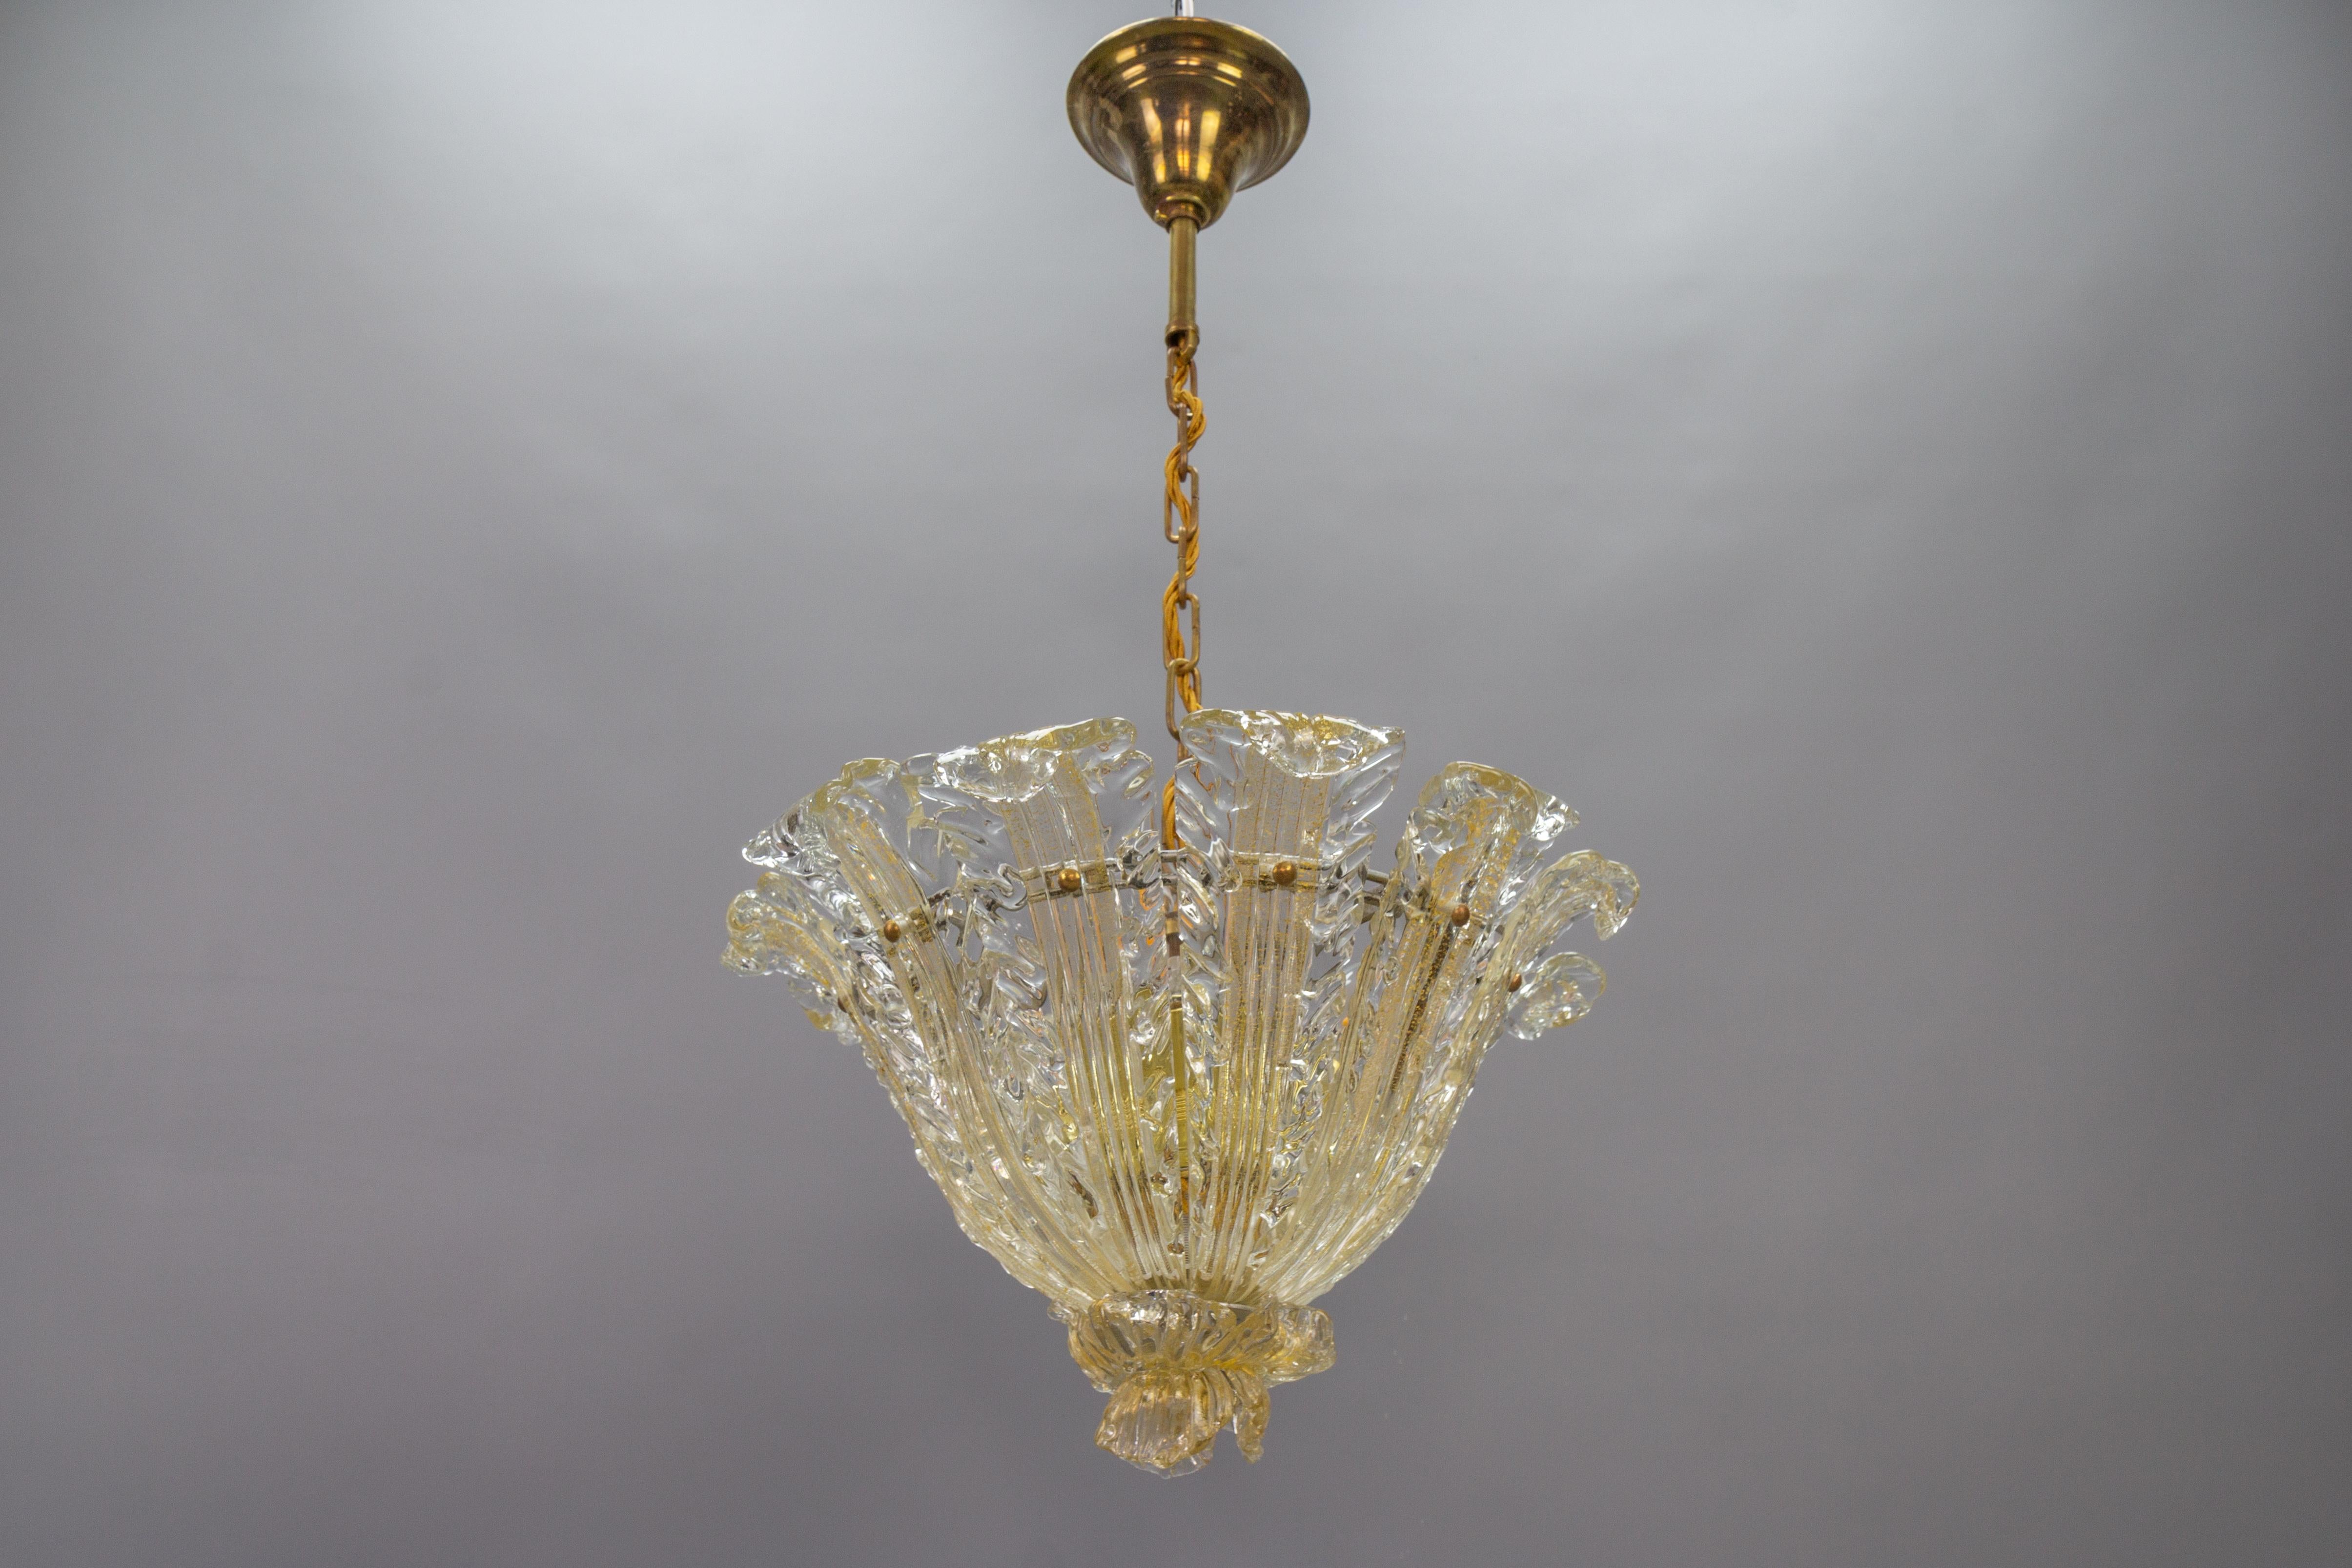 Italian Mid-Century Modern Murano glass foliage pendant light fixture in the shape of a lantern, from the circa 1950s, attributed to Ercole Barovier, designed for Barovier&Toso.
Curved thick-walled transparent hand-blown Murano glass leaves with